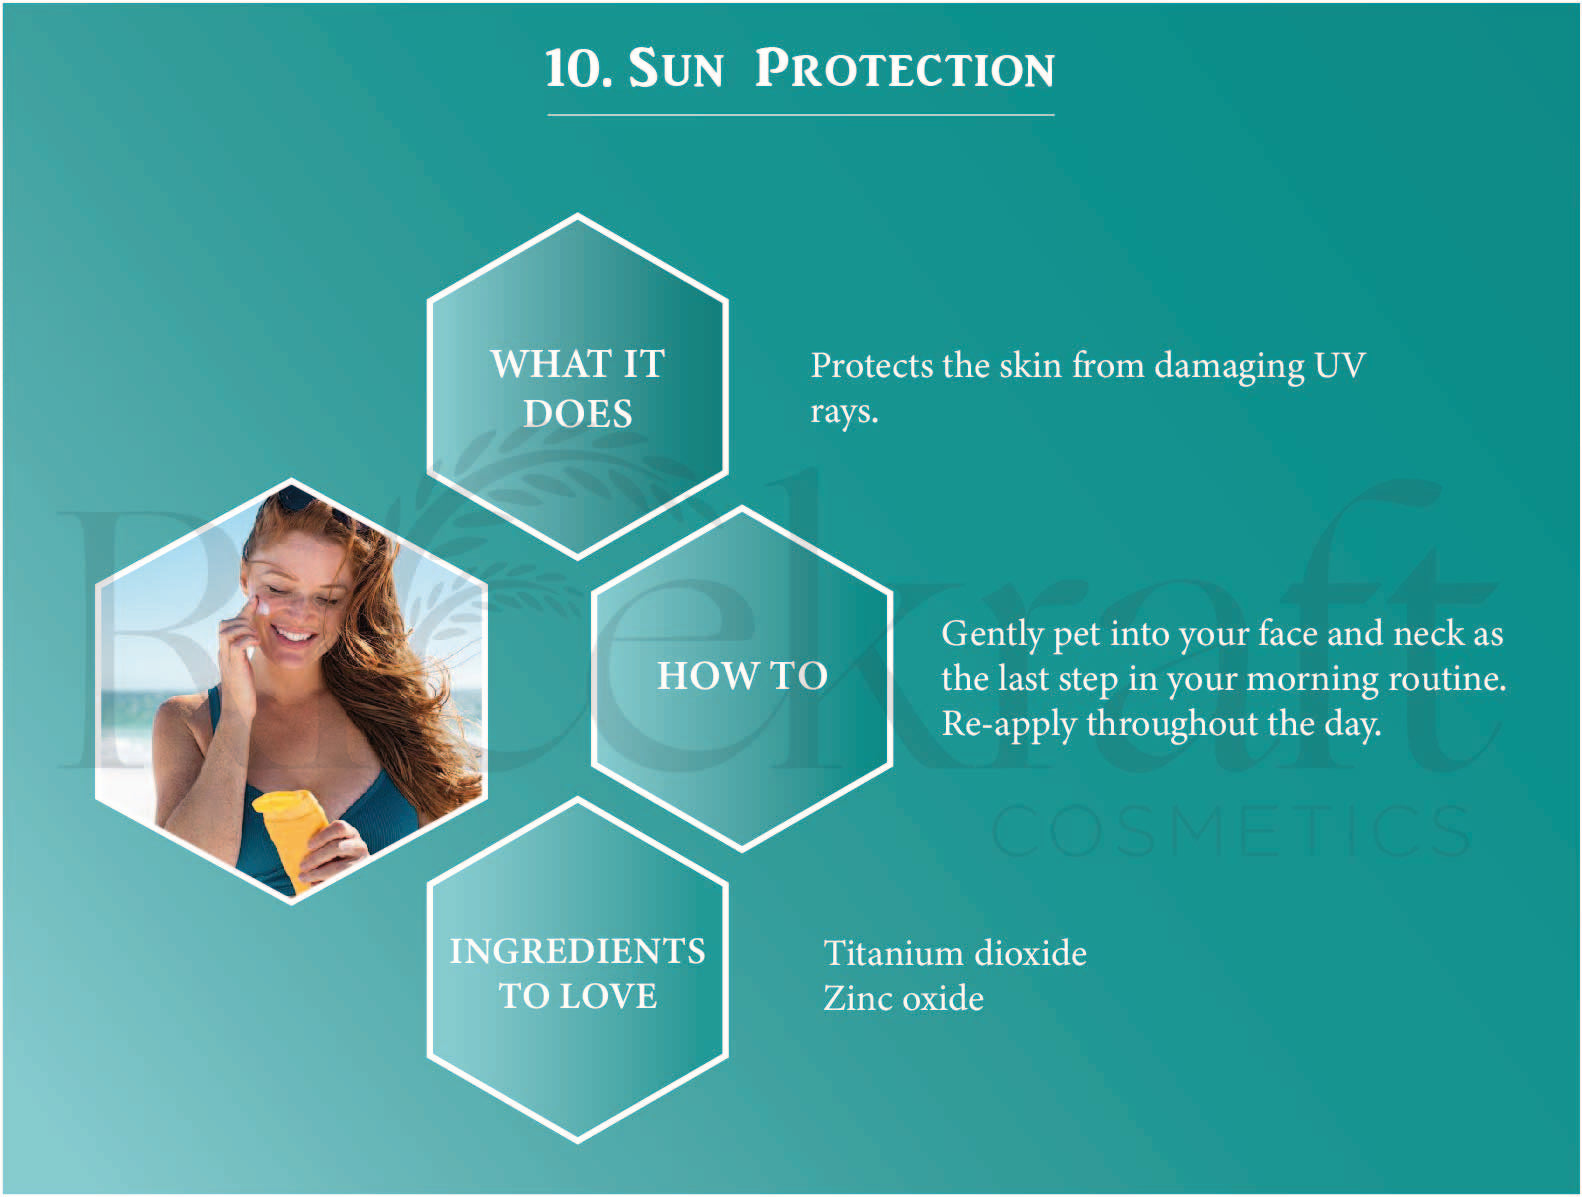 "Sun Protection: Shields from UV rays. Apply as final AM step, reapply. Key Ingredients: Titanium dioxide, Zinc oxide."